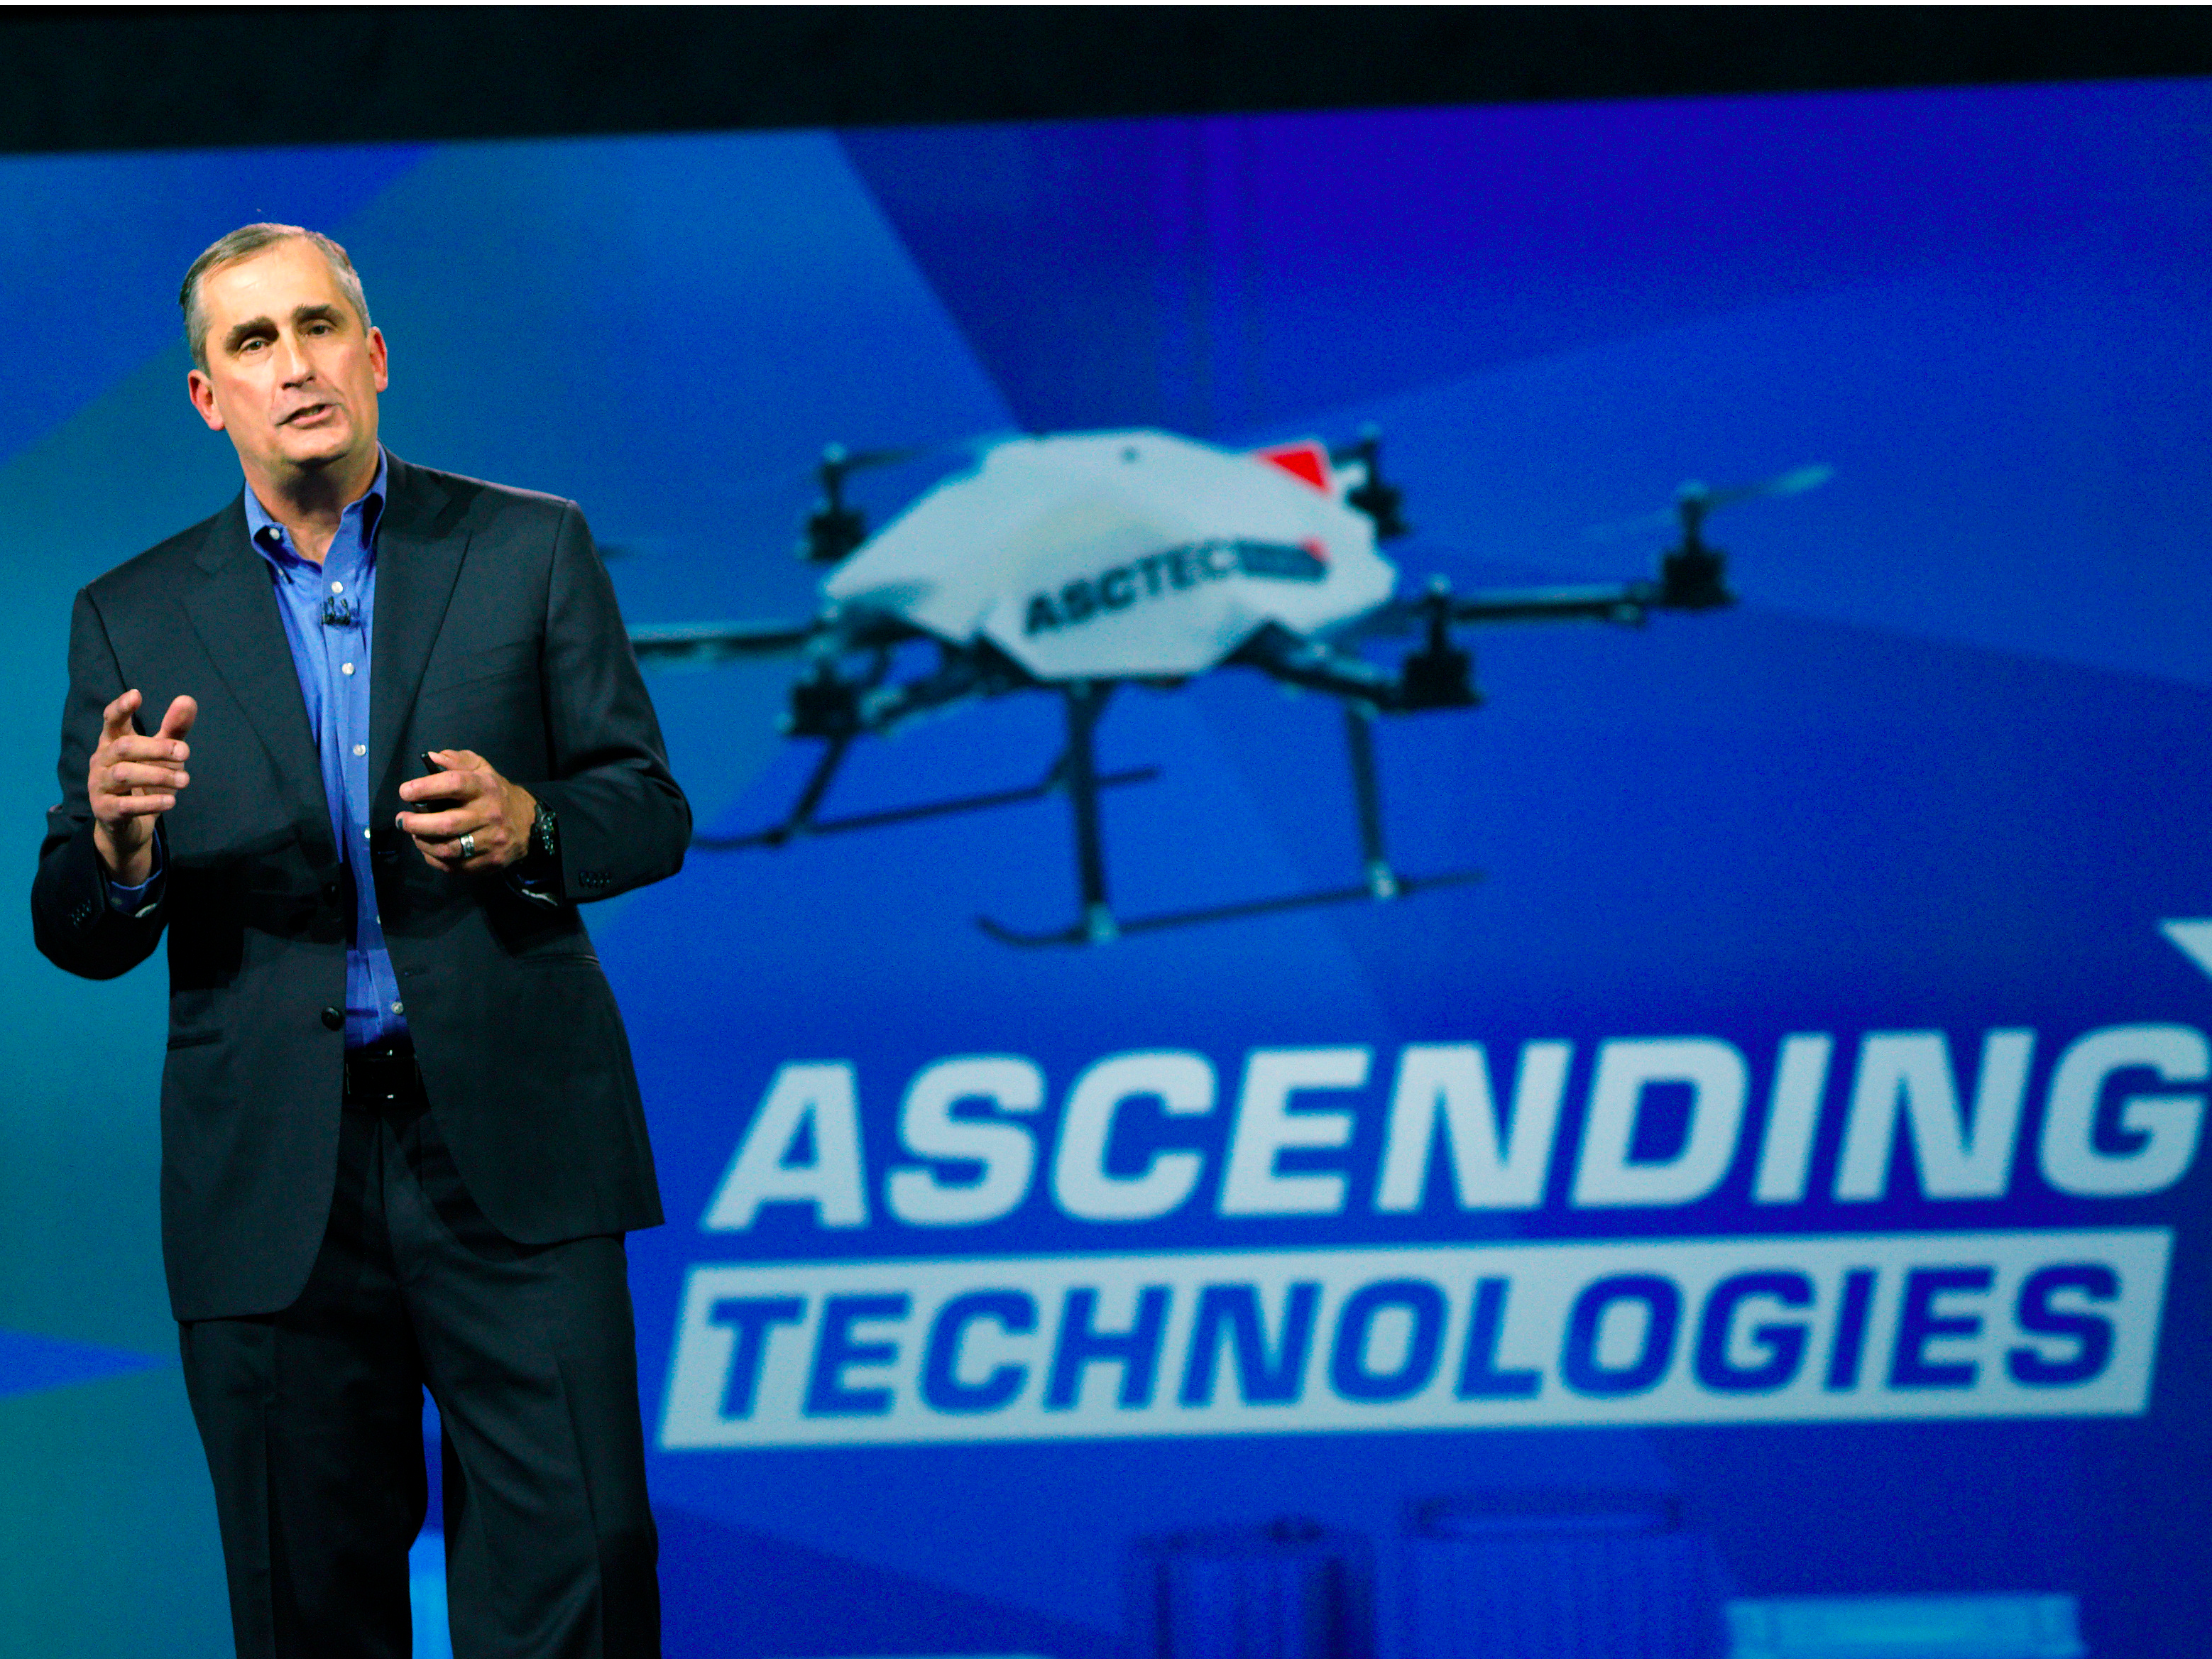 Intel's just showcased a insane drone that can follow you in real